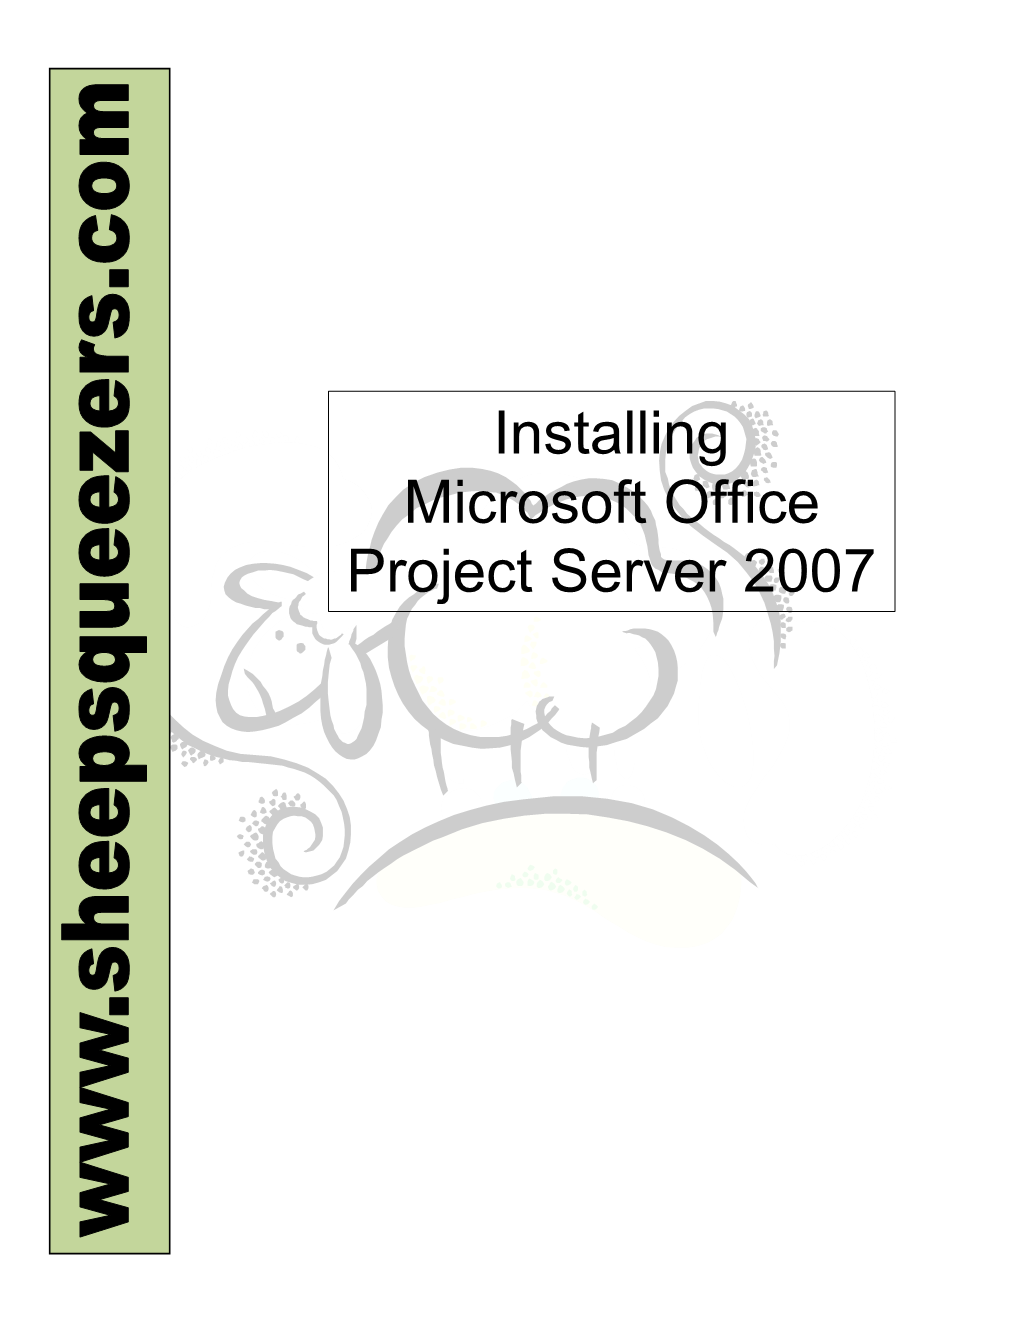 Installing Microsoft Office Project Server 2007